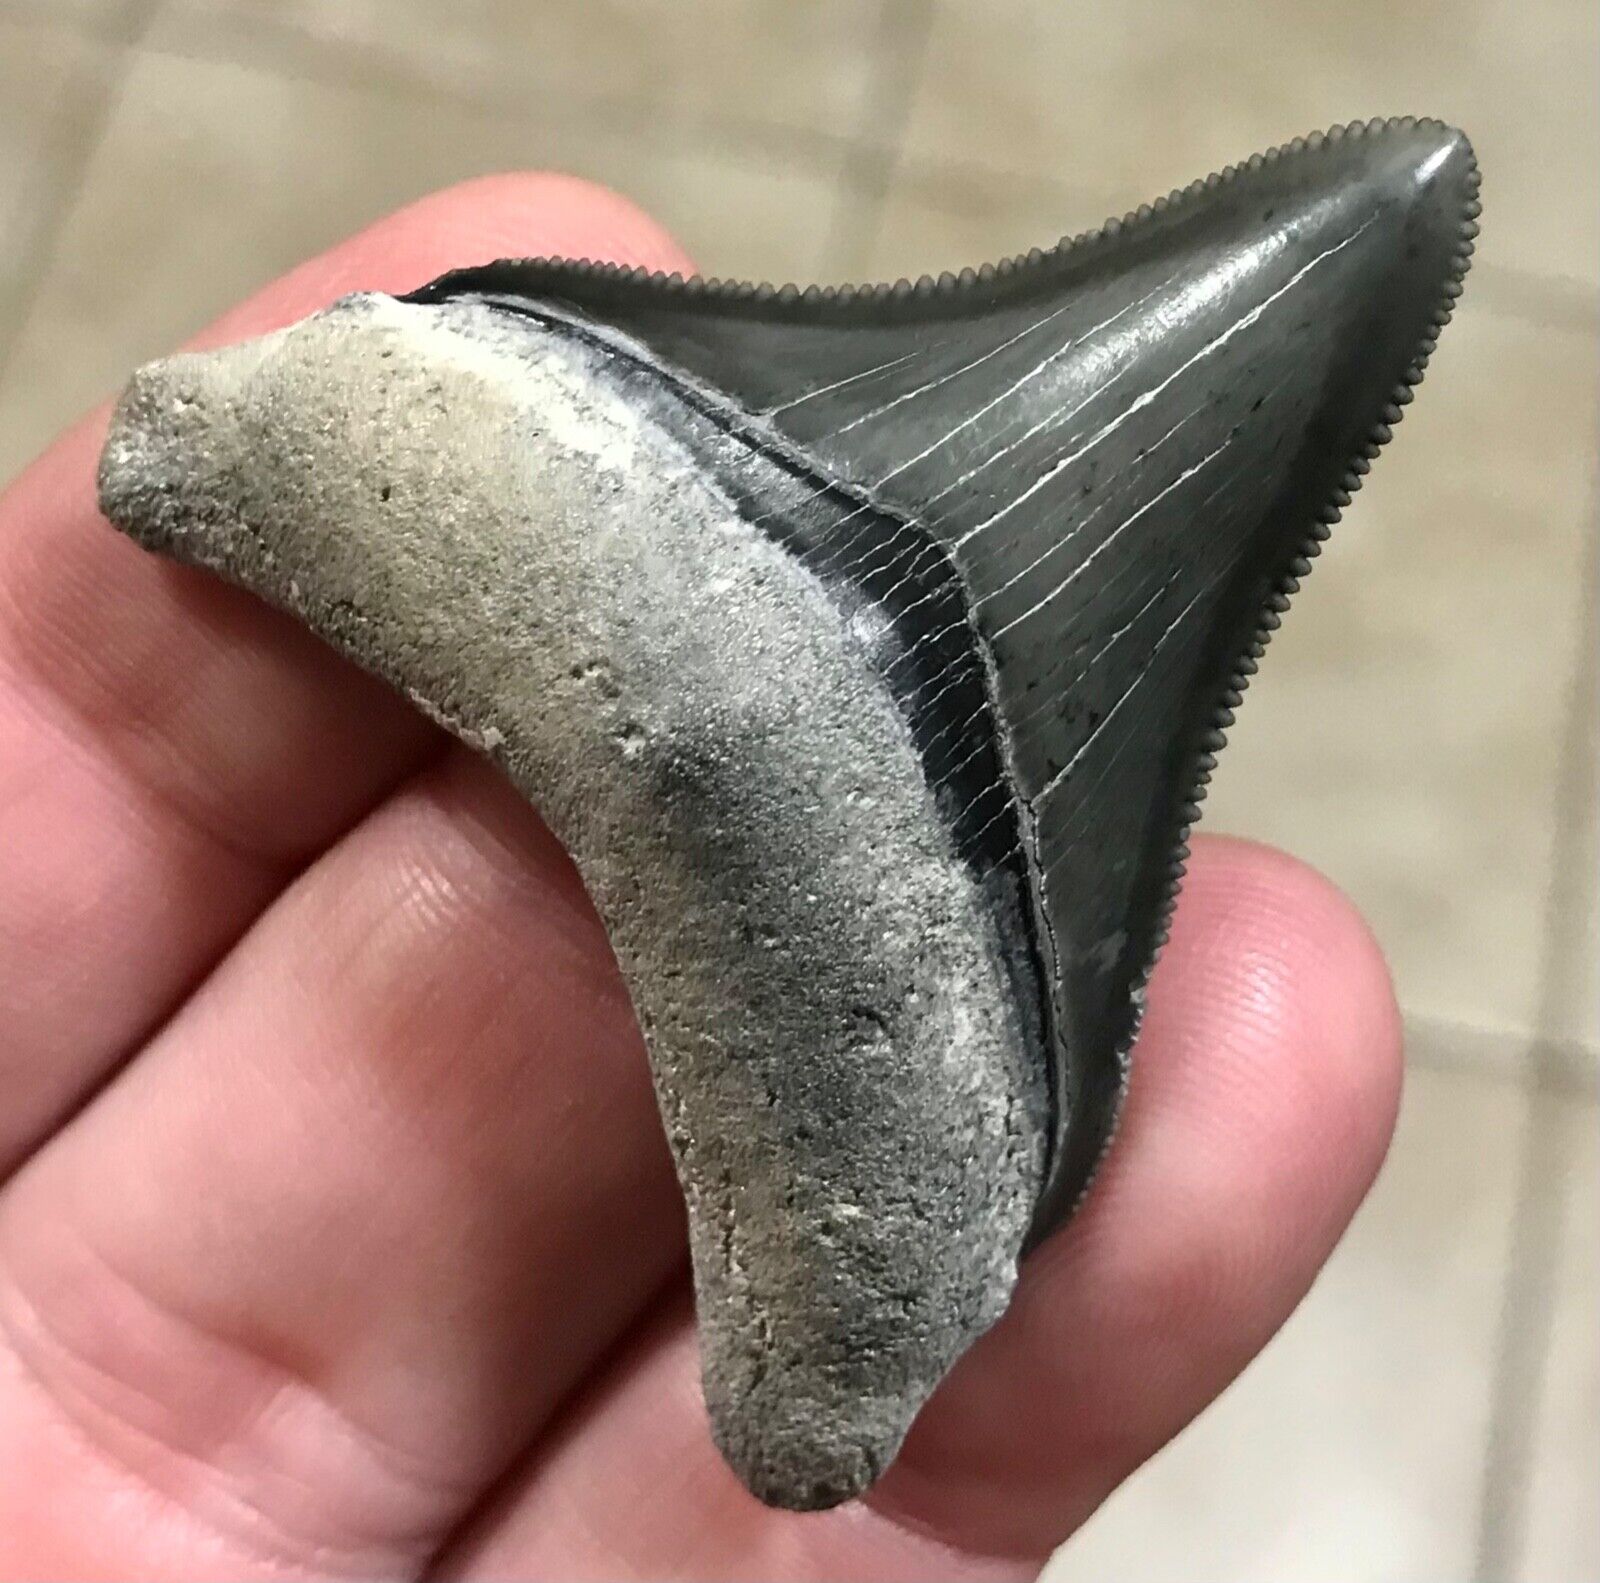 MARVELOUS HIGH QUALITY - B.VALLEY - 2.2” x 1.92” - Megalodon Shark Tooth Fossil